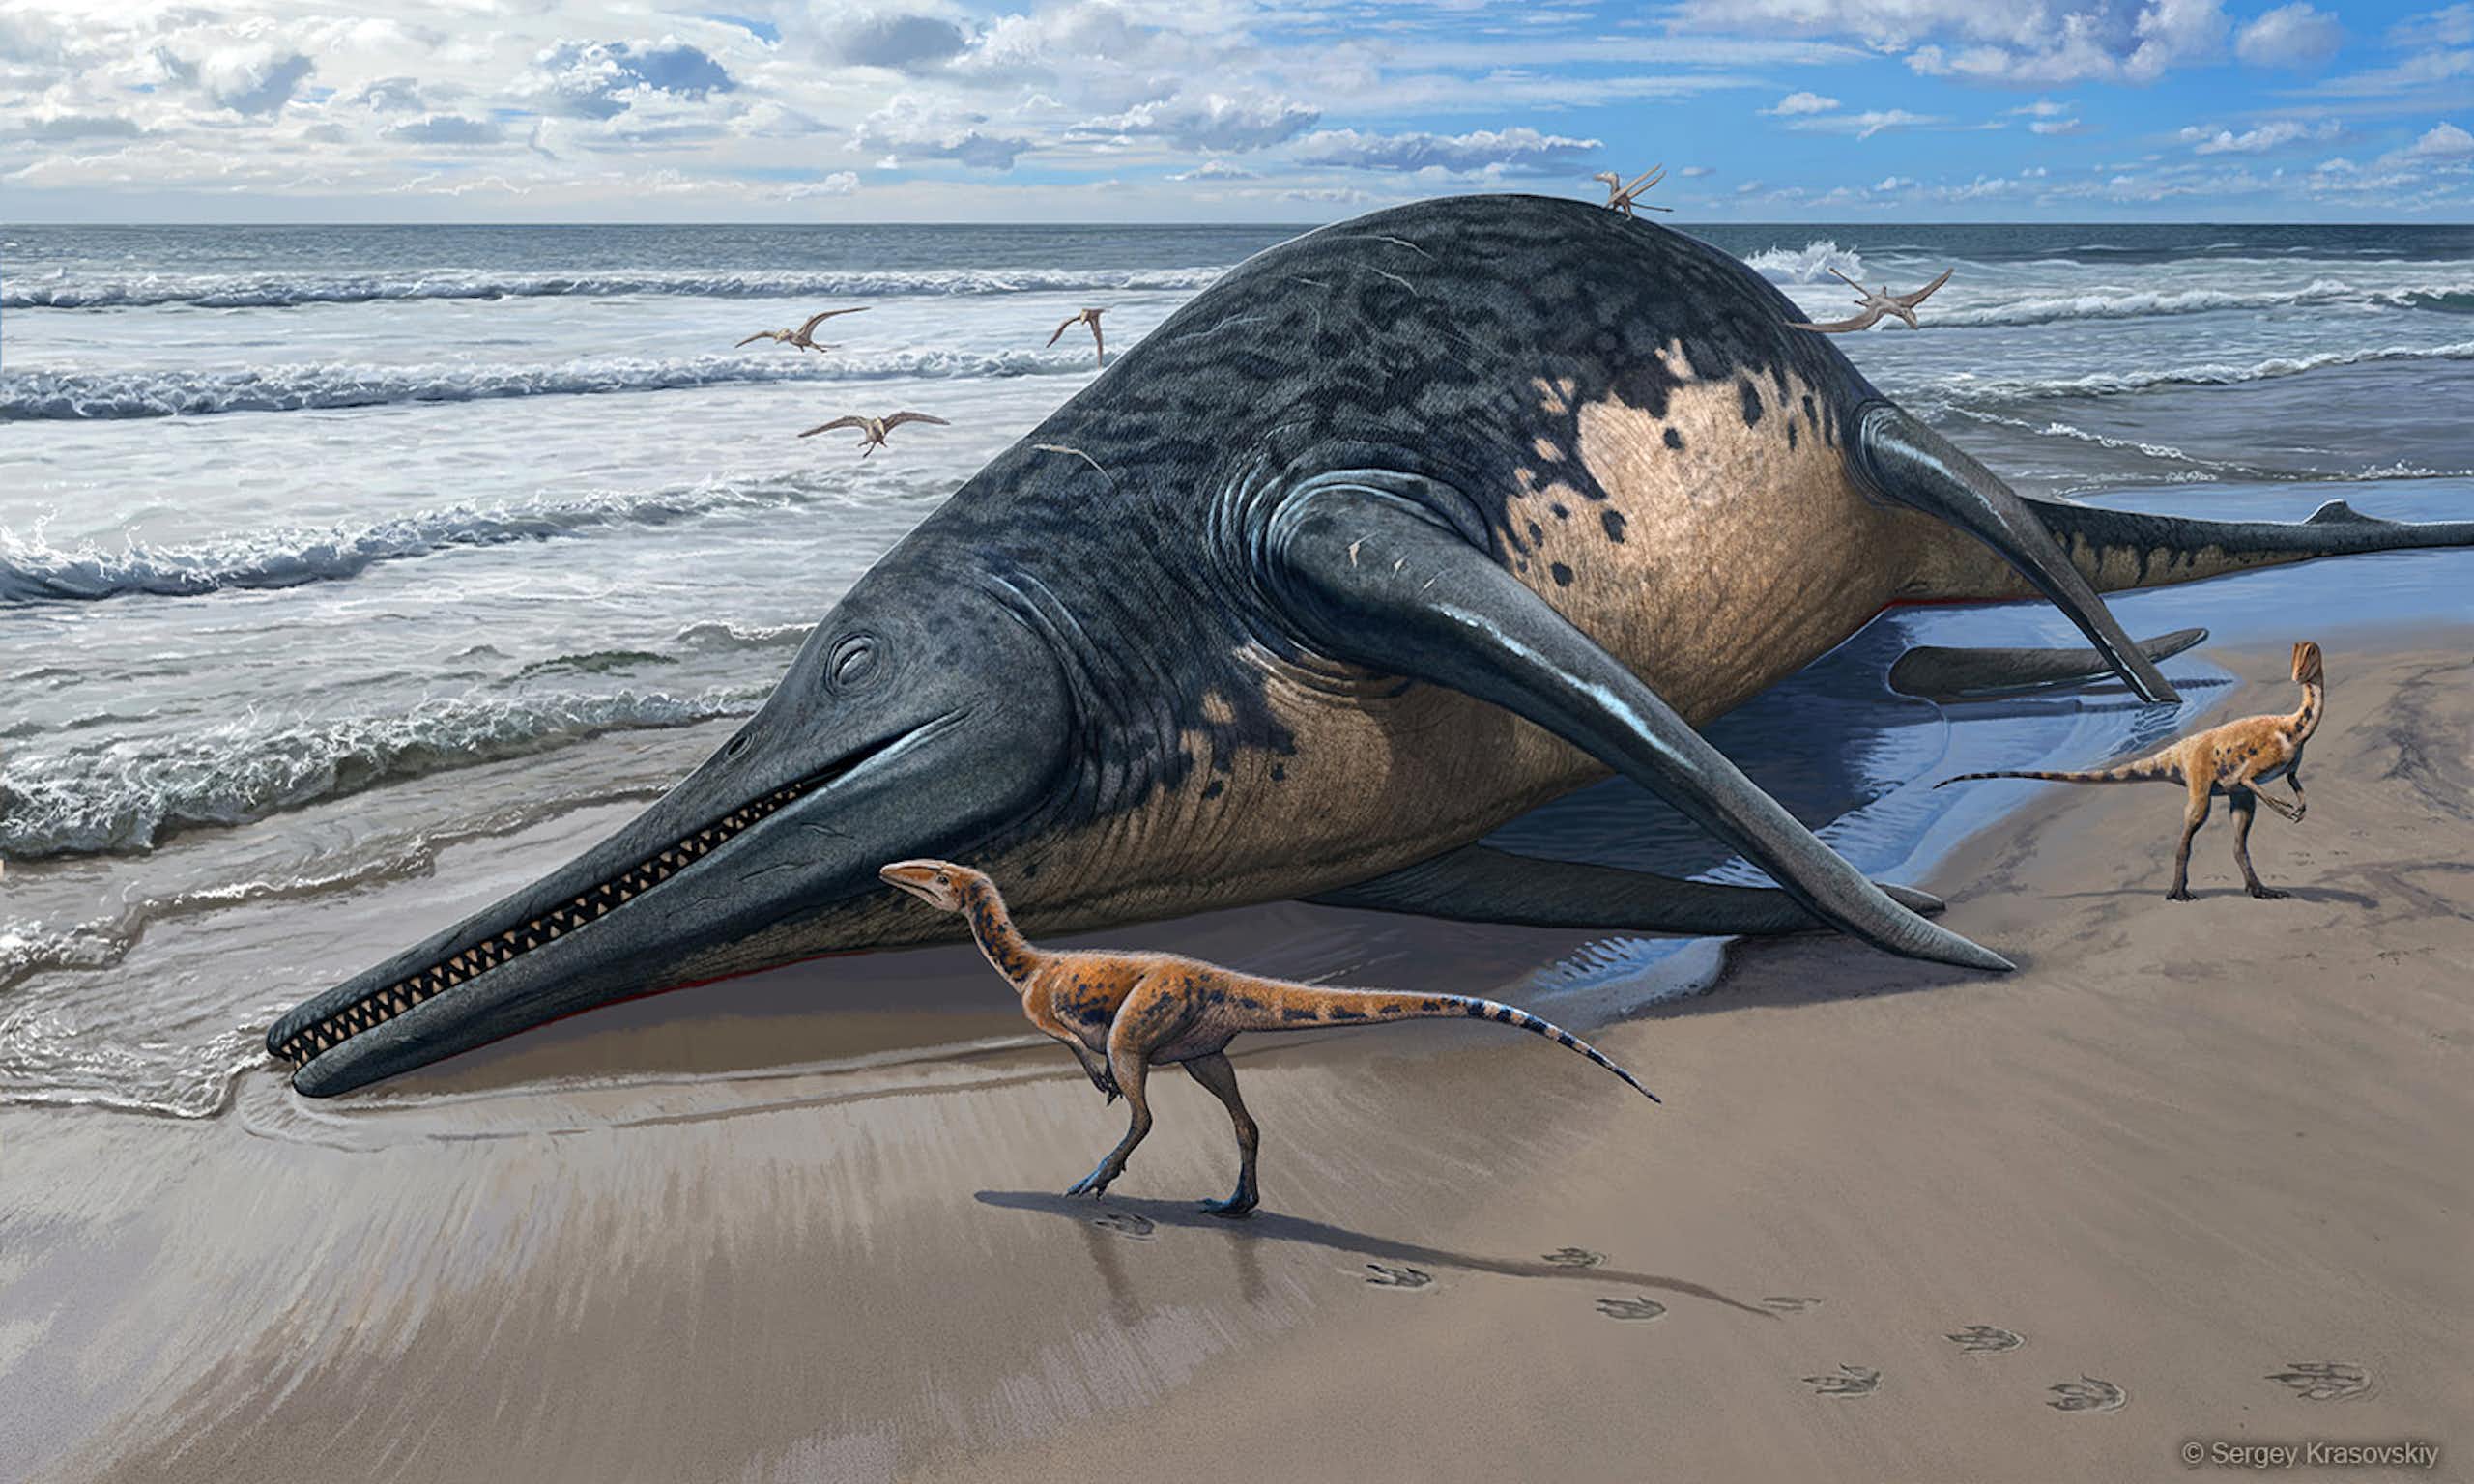 Artist's impression of giant marine reptile on the beach with two smaller land based reptiles